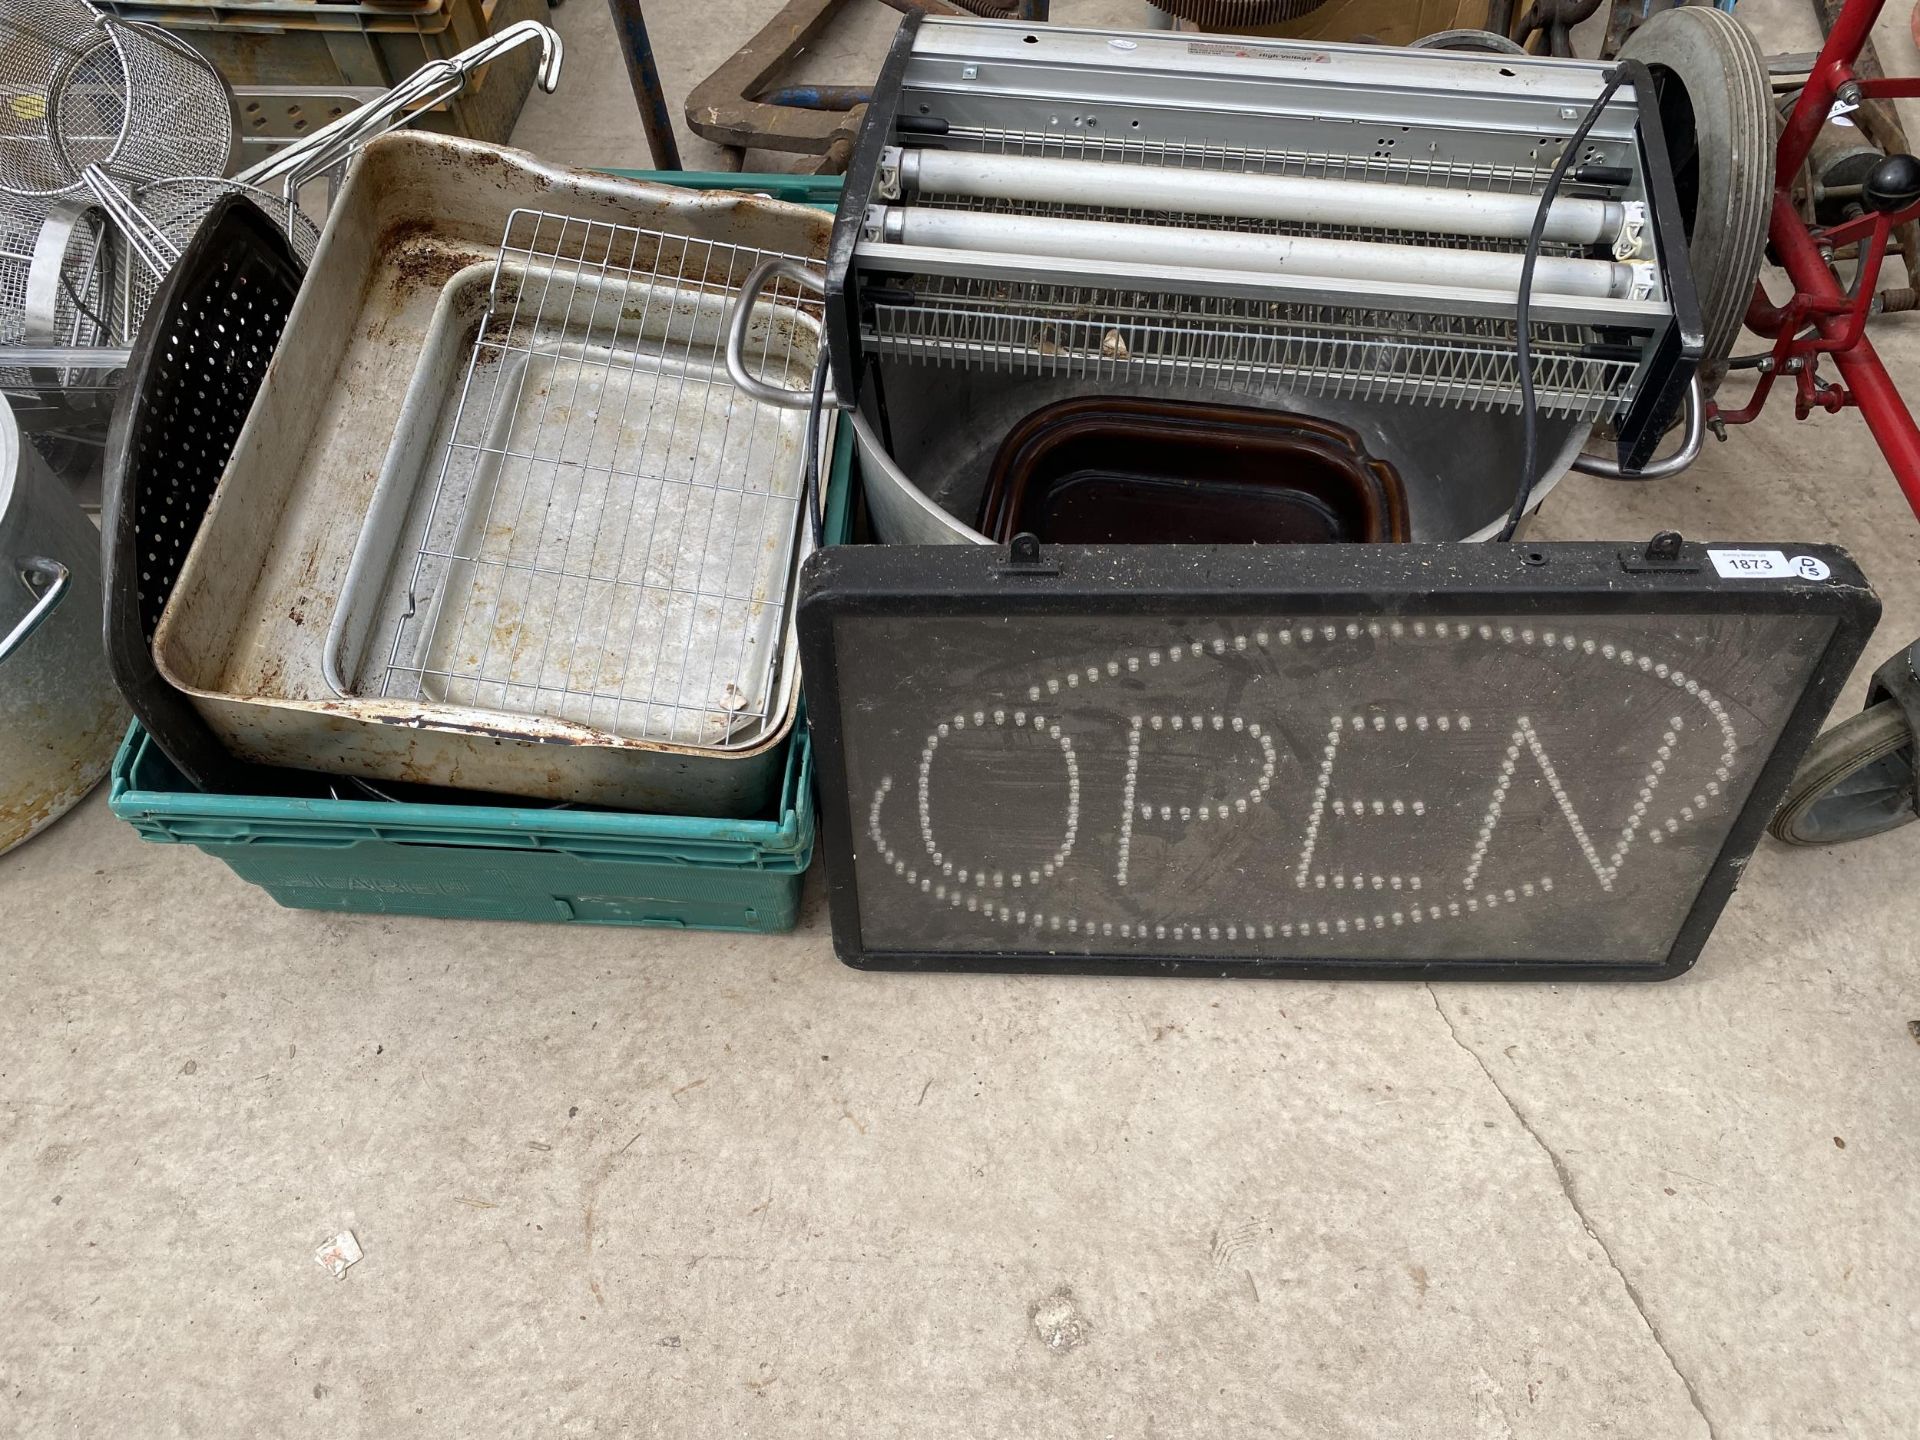 A MIXED GROUP OF ITEMS TO INCLUDE AN 'OPEN' LIGHT UP SIGN, PANS ETC